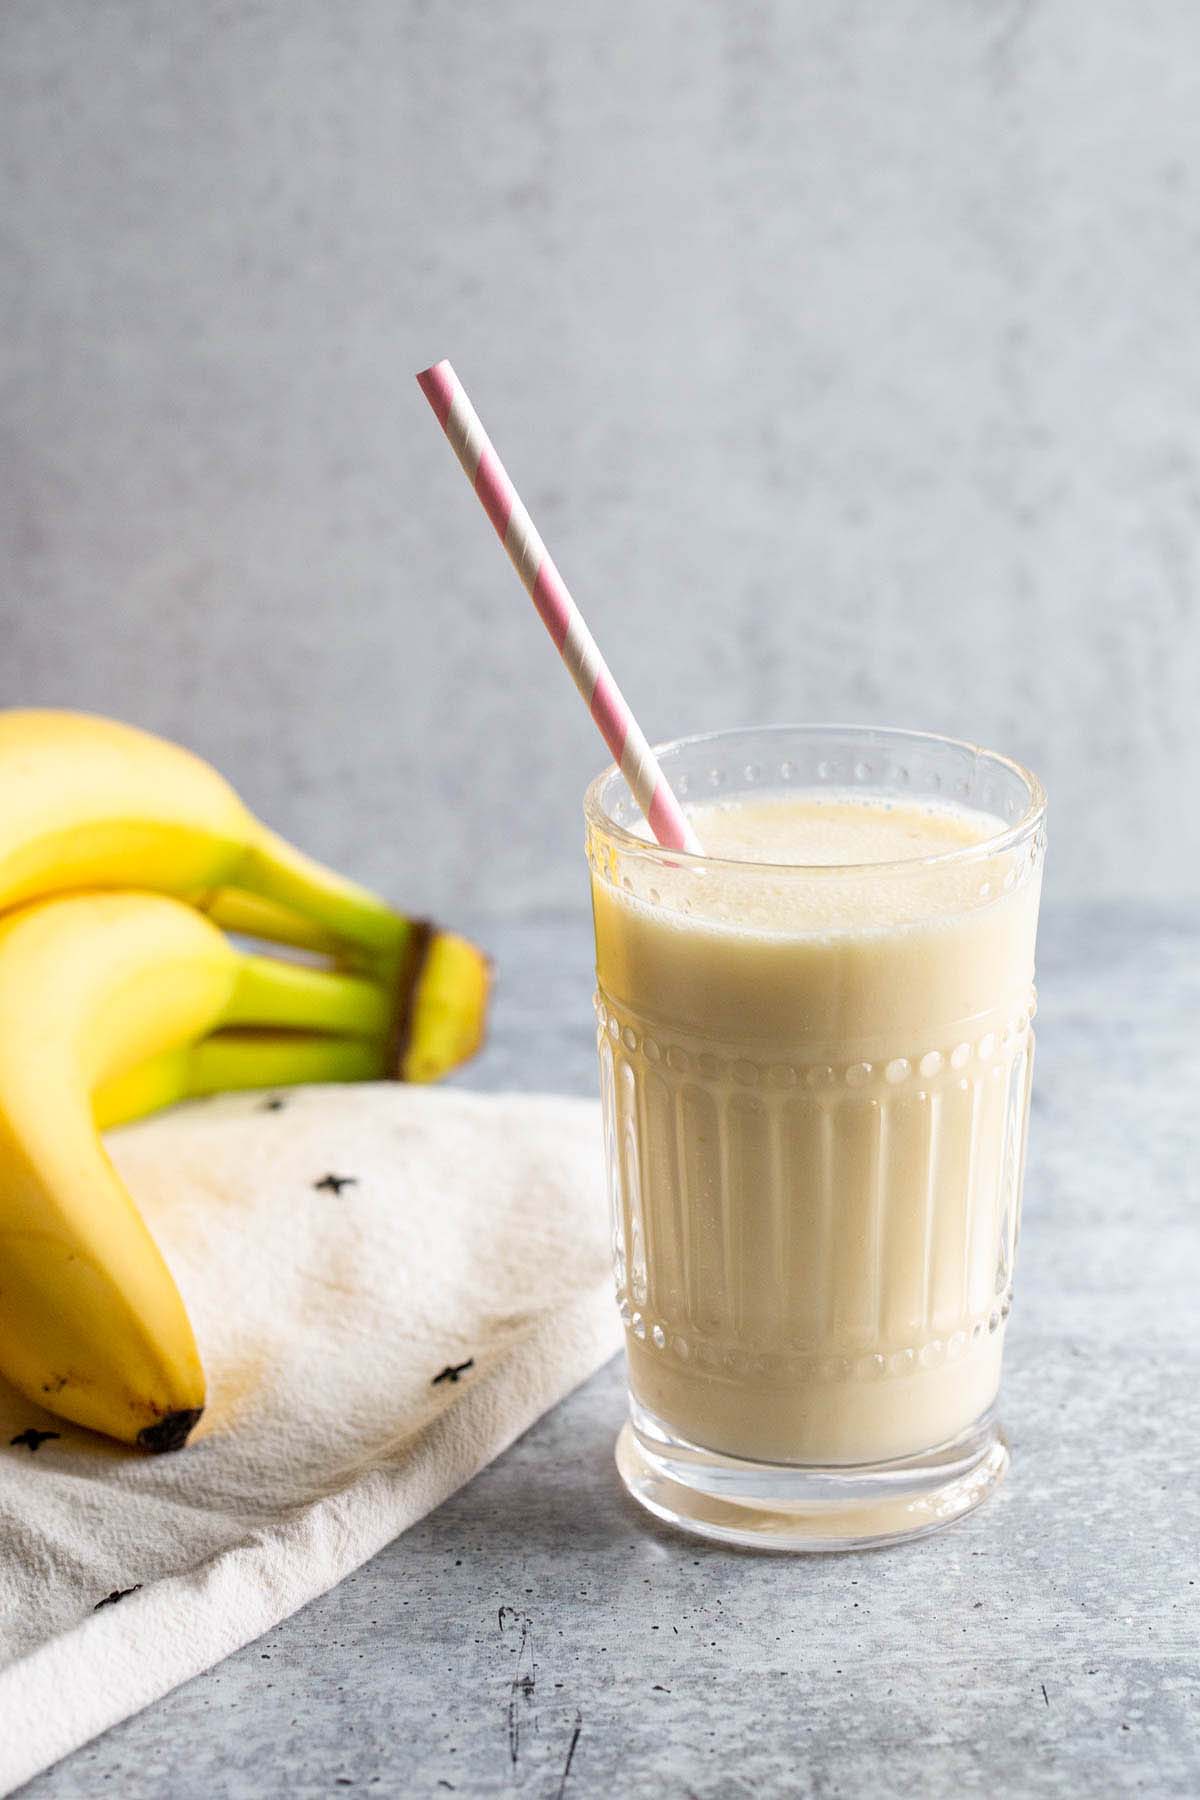 Smoothie in a glass with bananas in the background.